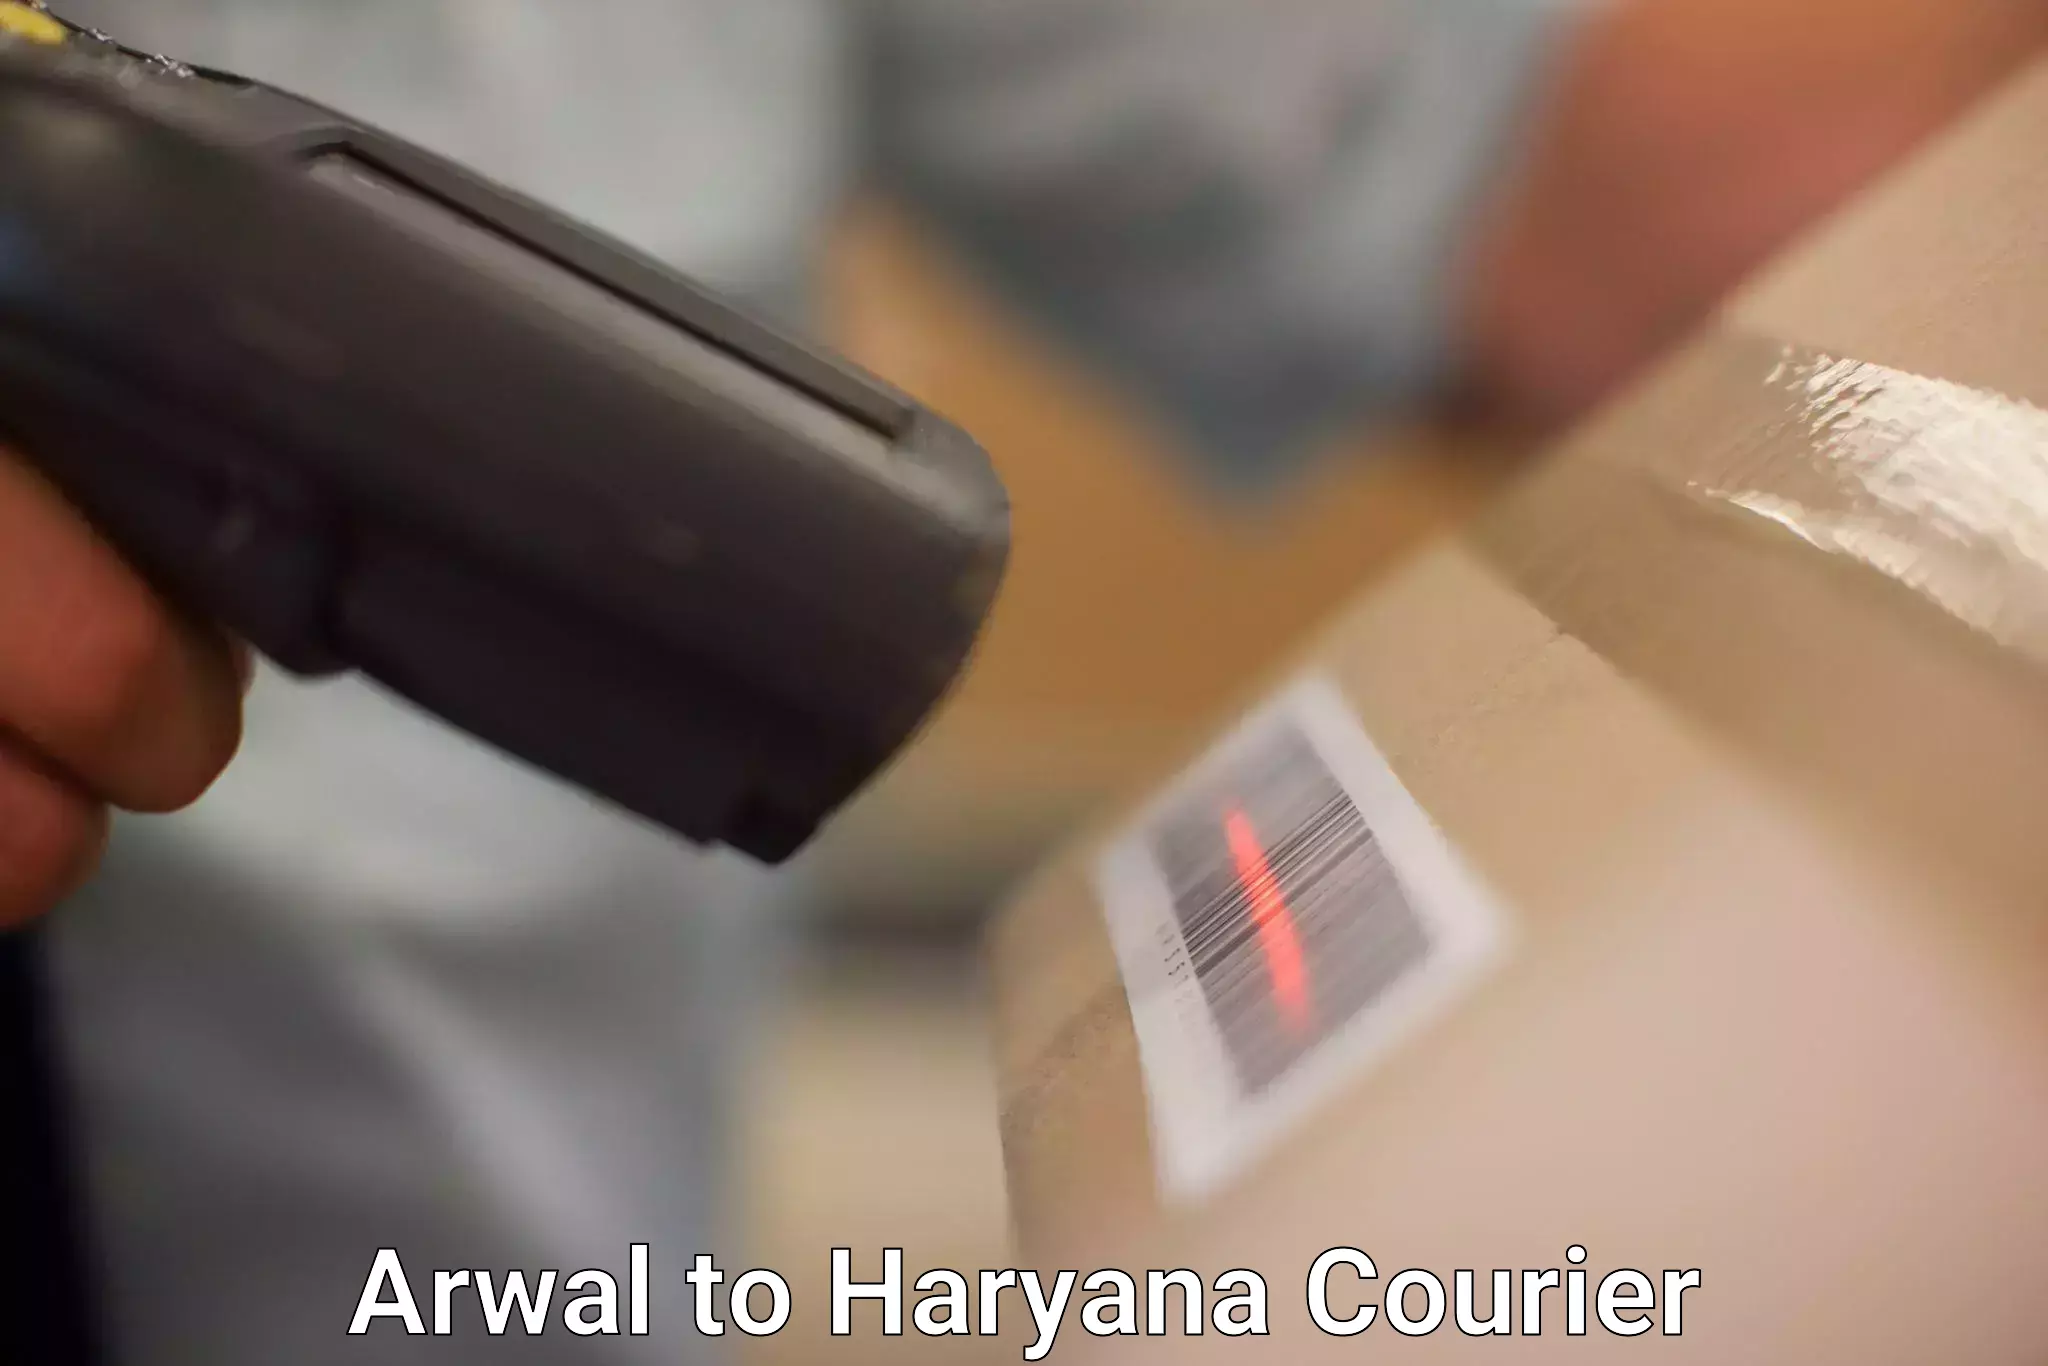 Flexible delivery schedules Arwal to Haryana